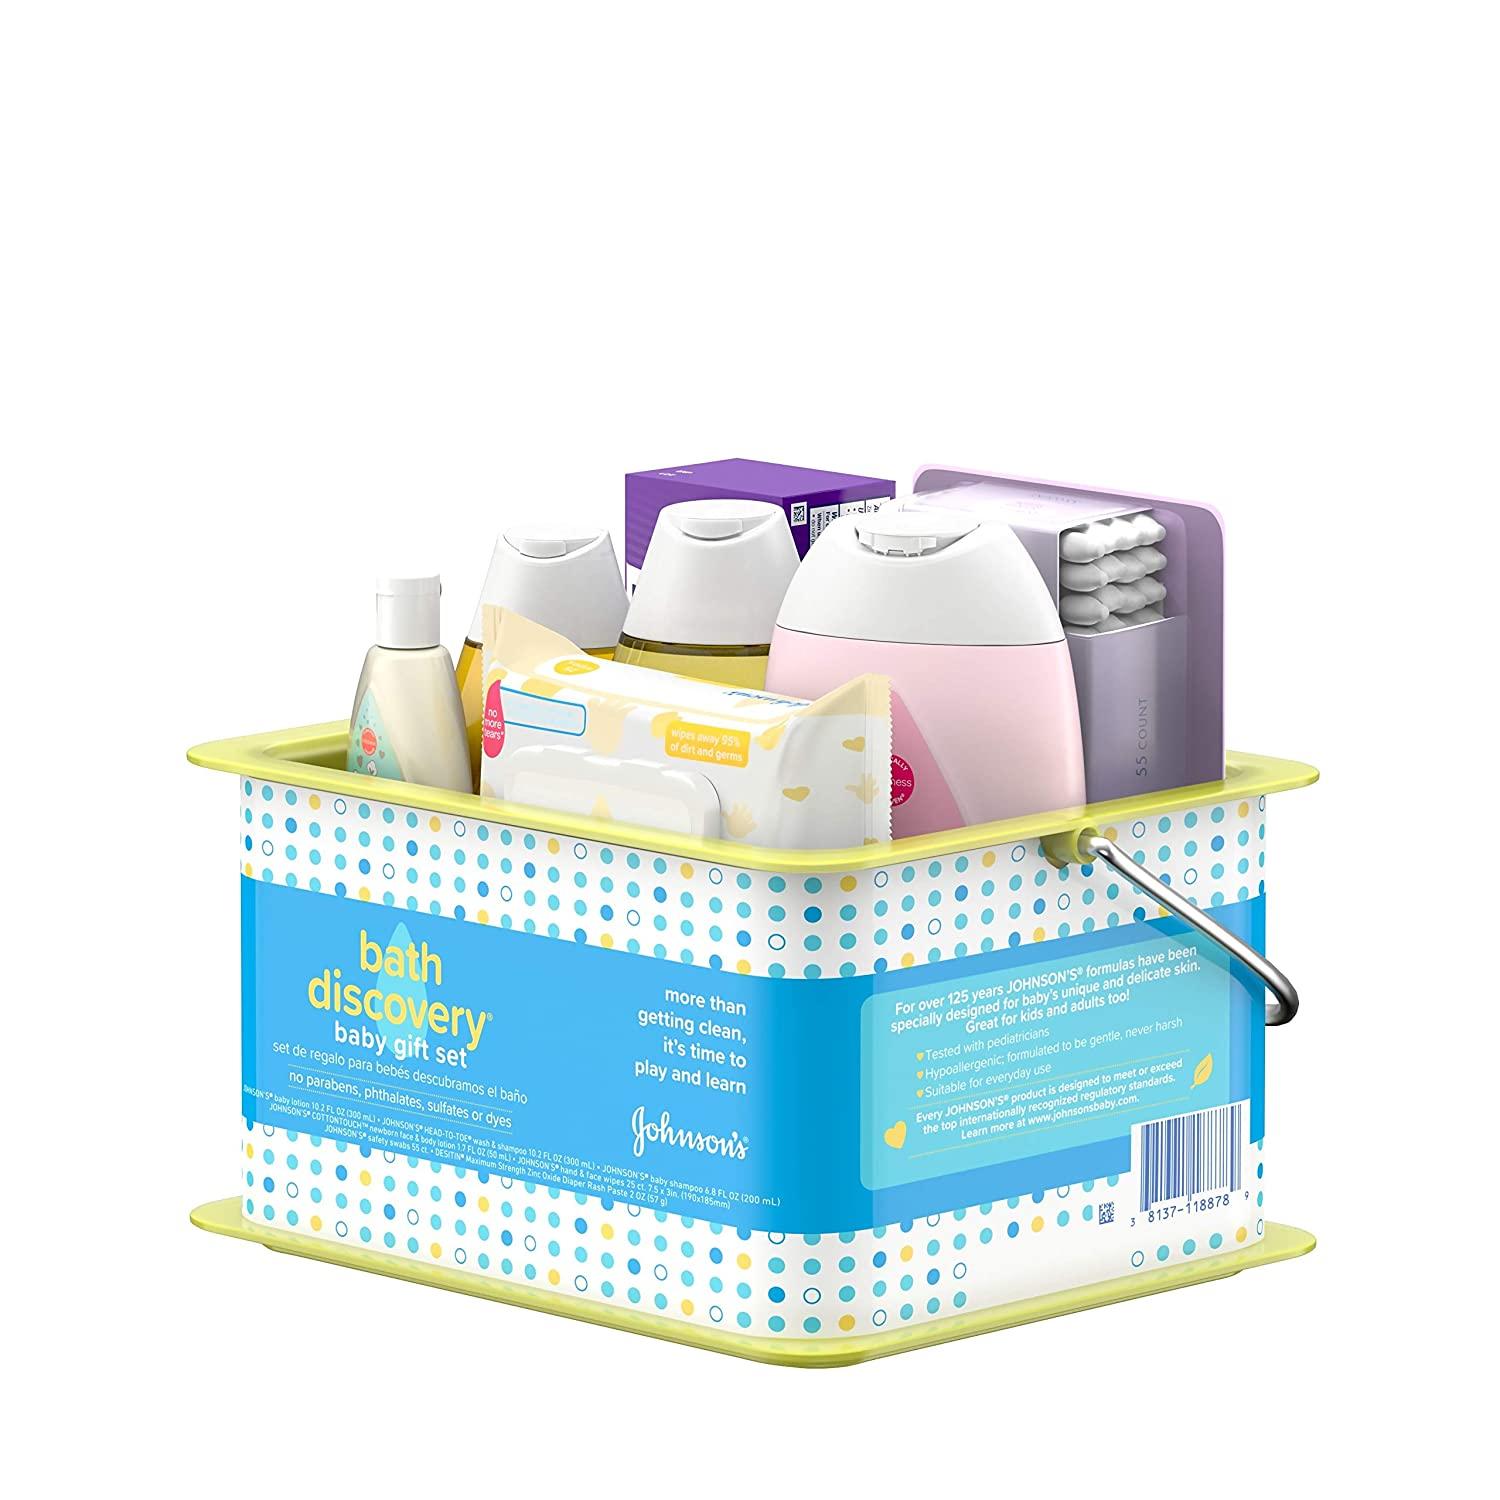 A Pediatrician's New Baby Kit: Great Baby Shower Gift